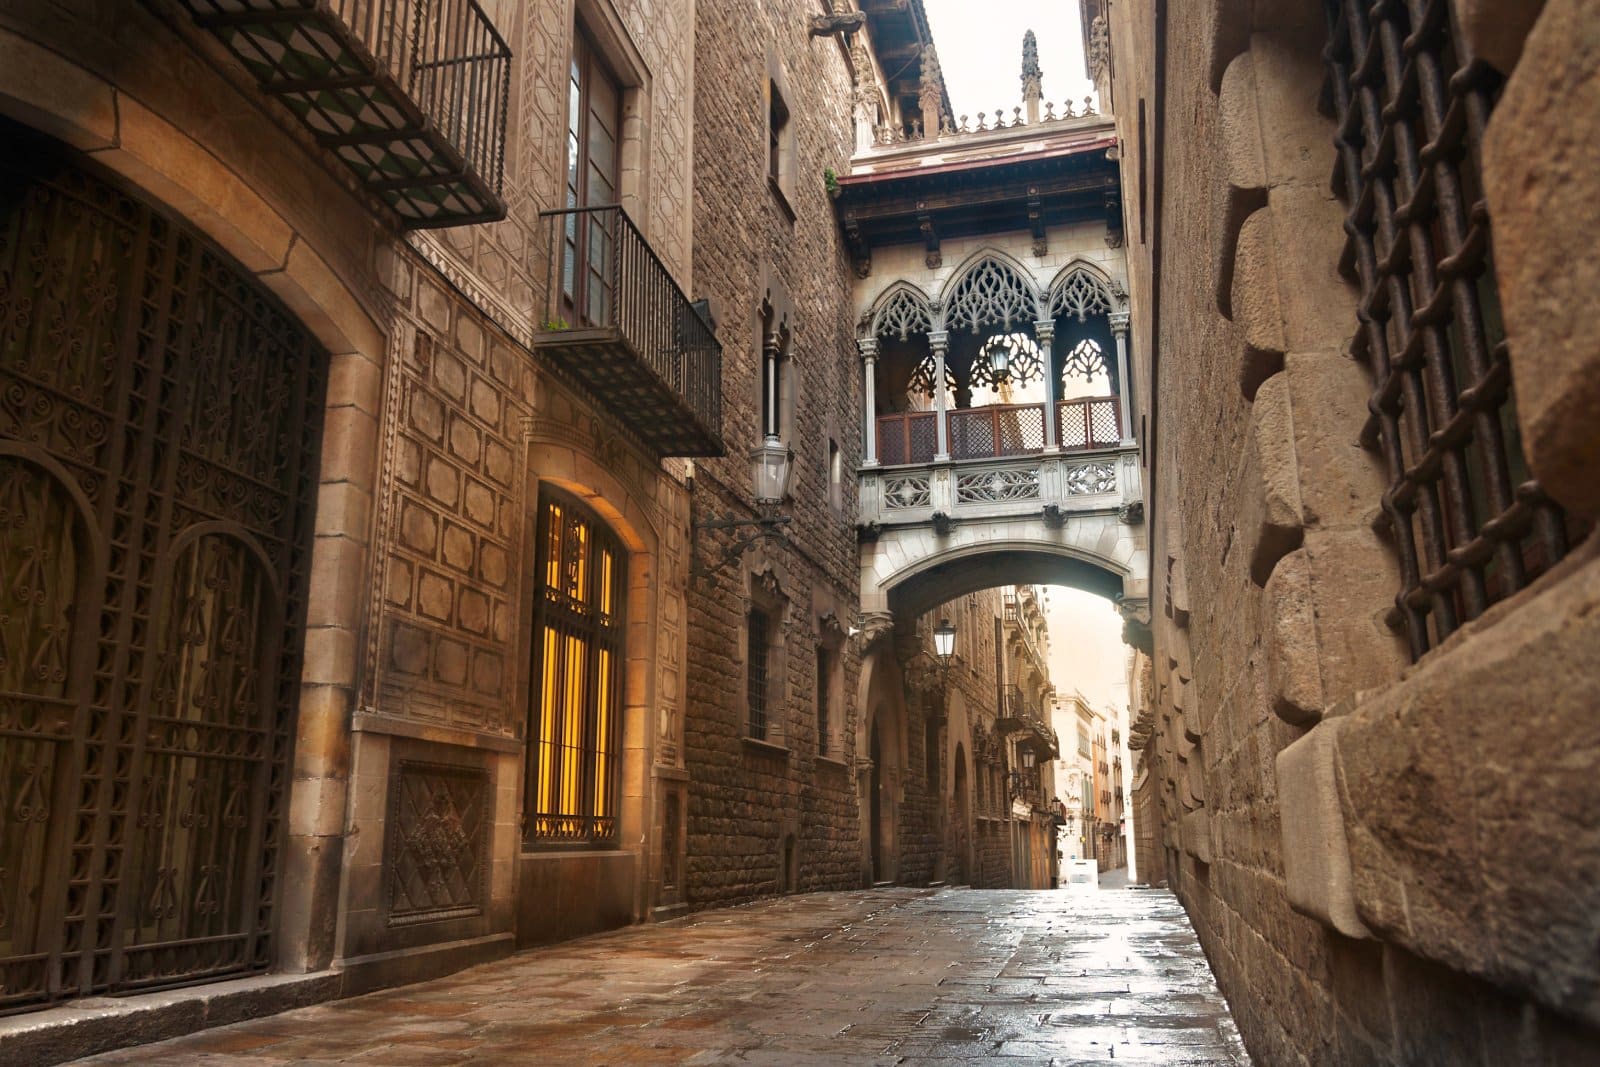 <p><span>Discover the heart of Barcelona’s Gothic Quarter, a labyrinth of narrow alleys and hidden squares that come alive at night. This historic district is a treasure trove of old-world bars and quaint taverns, where the walls hold secret tales of the past.</span></p> <p><span>Enjoy an evening stroll under the ancient archways, sipping local Catalan wines or craft beers in dimly lit bars with charm and character. The Gothic Quarter has a historic ambiance and vibrant cultural hub where live music spills onto the cobblestone streets. Impromptu performances add to the lively atmosphere.</span></p> <p><b>Insider’s Tip: </b><span>Look for hidden speakeasy bars in the Gothic Quarter for an exclusive experience. </span></p> <p><b>When To Travel: </b><span>Year-round, though spring and autumn offer pleasant temperatures for night-time explorations. </span></p> <p><b>How To Get There: </b><span>Accessible via the Jaume I or Liceu Metro stations.</span></p>